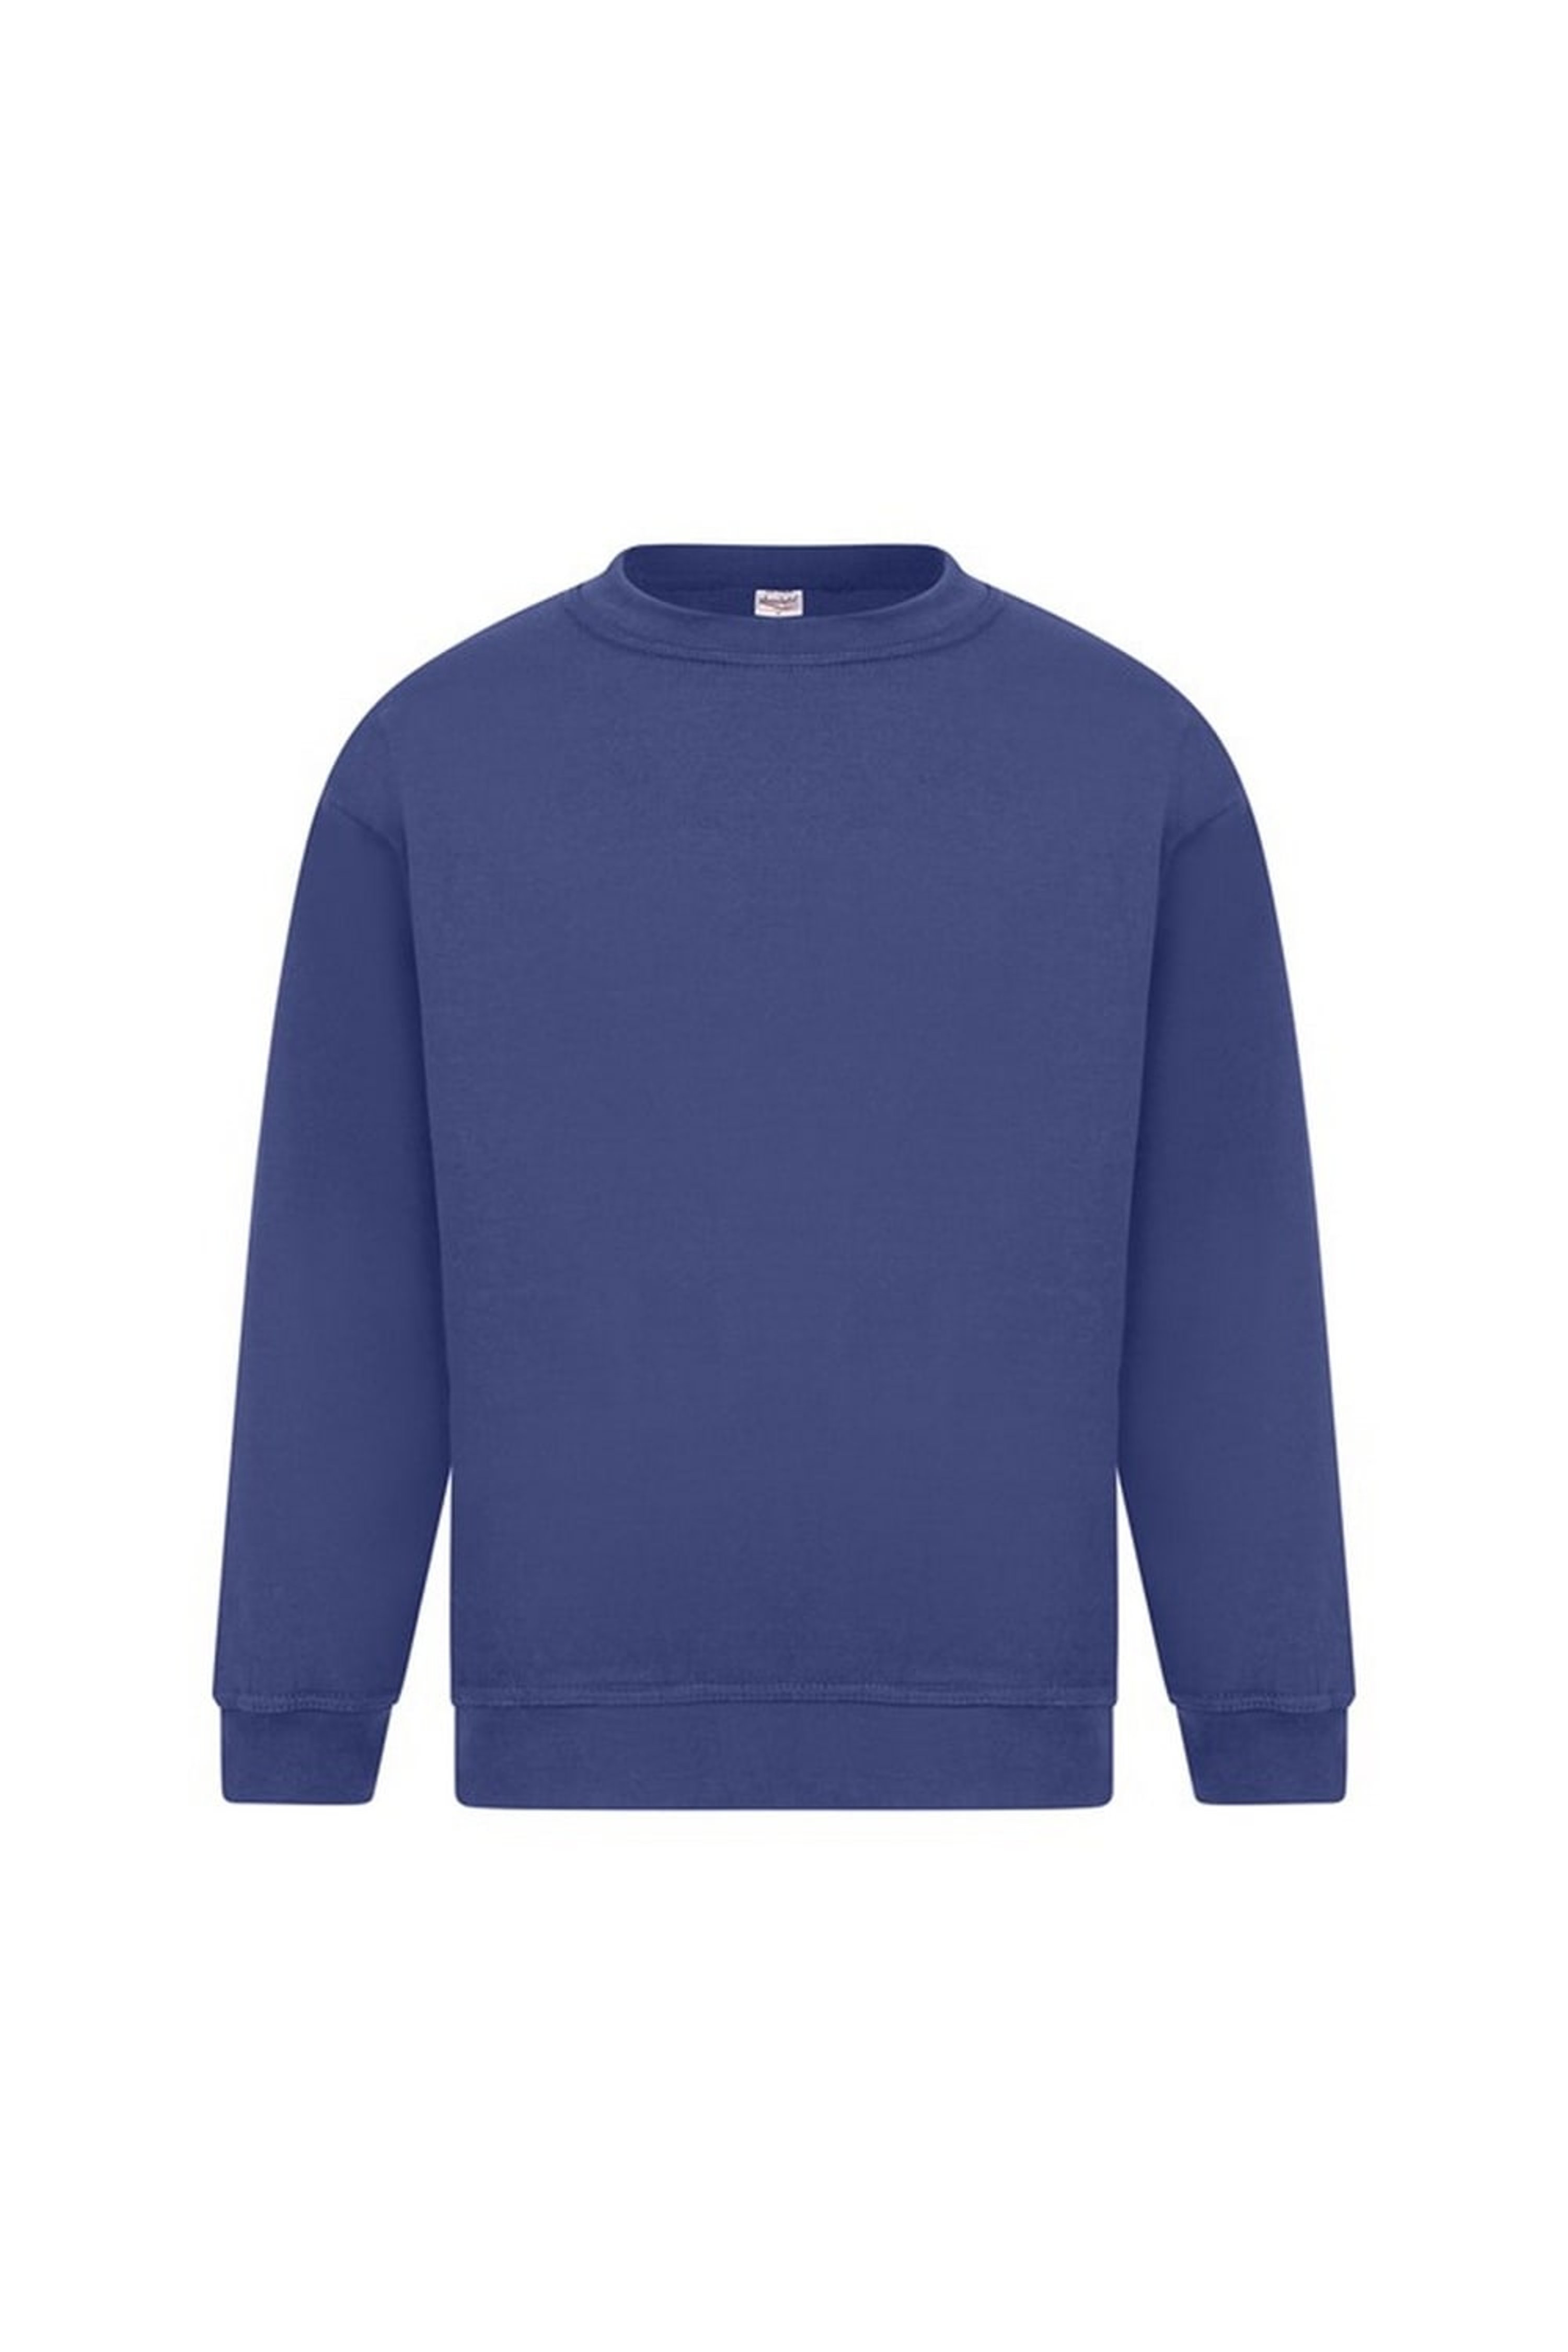 ABSOLUTE APPAREL ABSOLUTE APPAREL MENS STERLING SWEAT